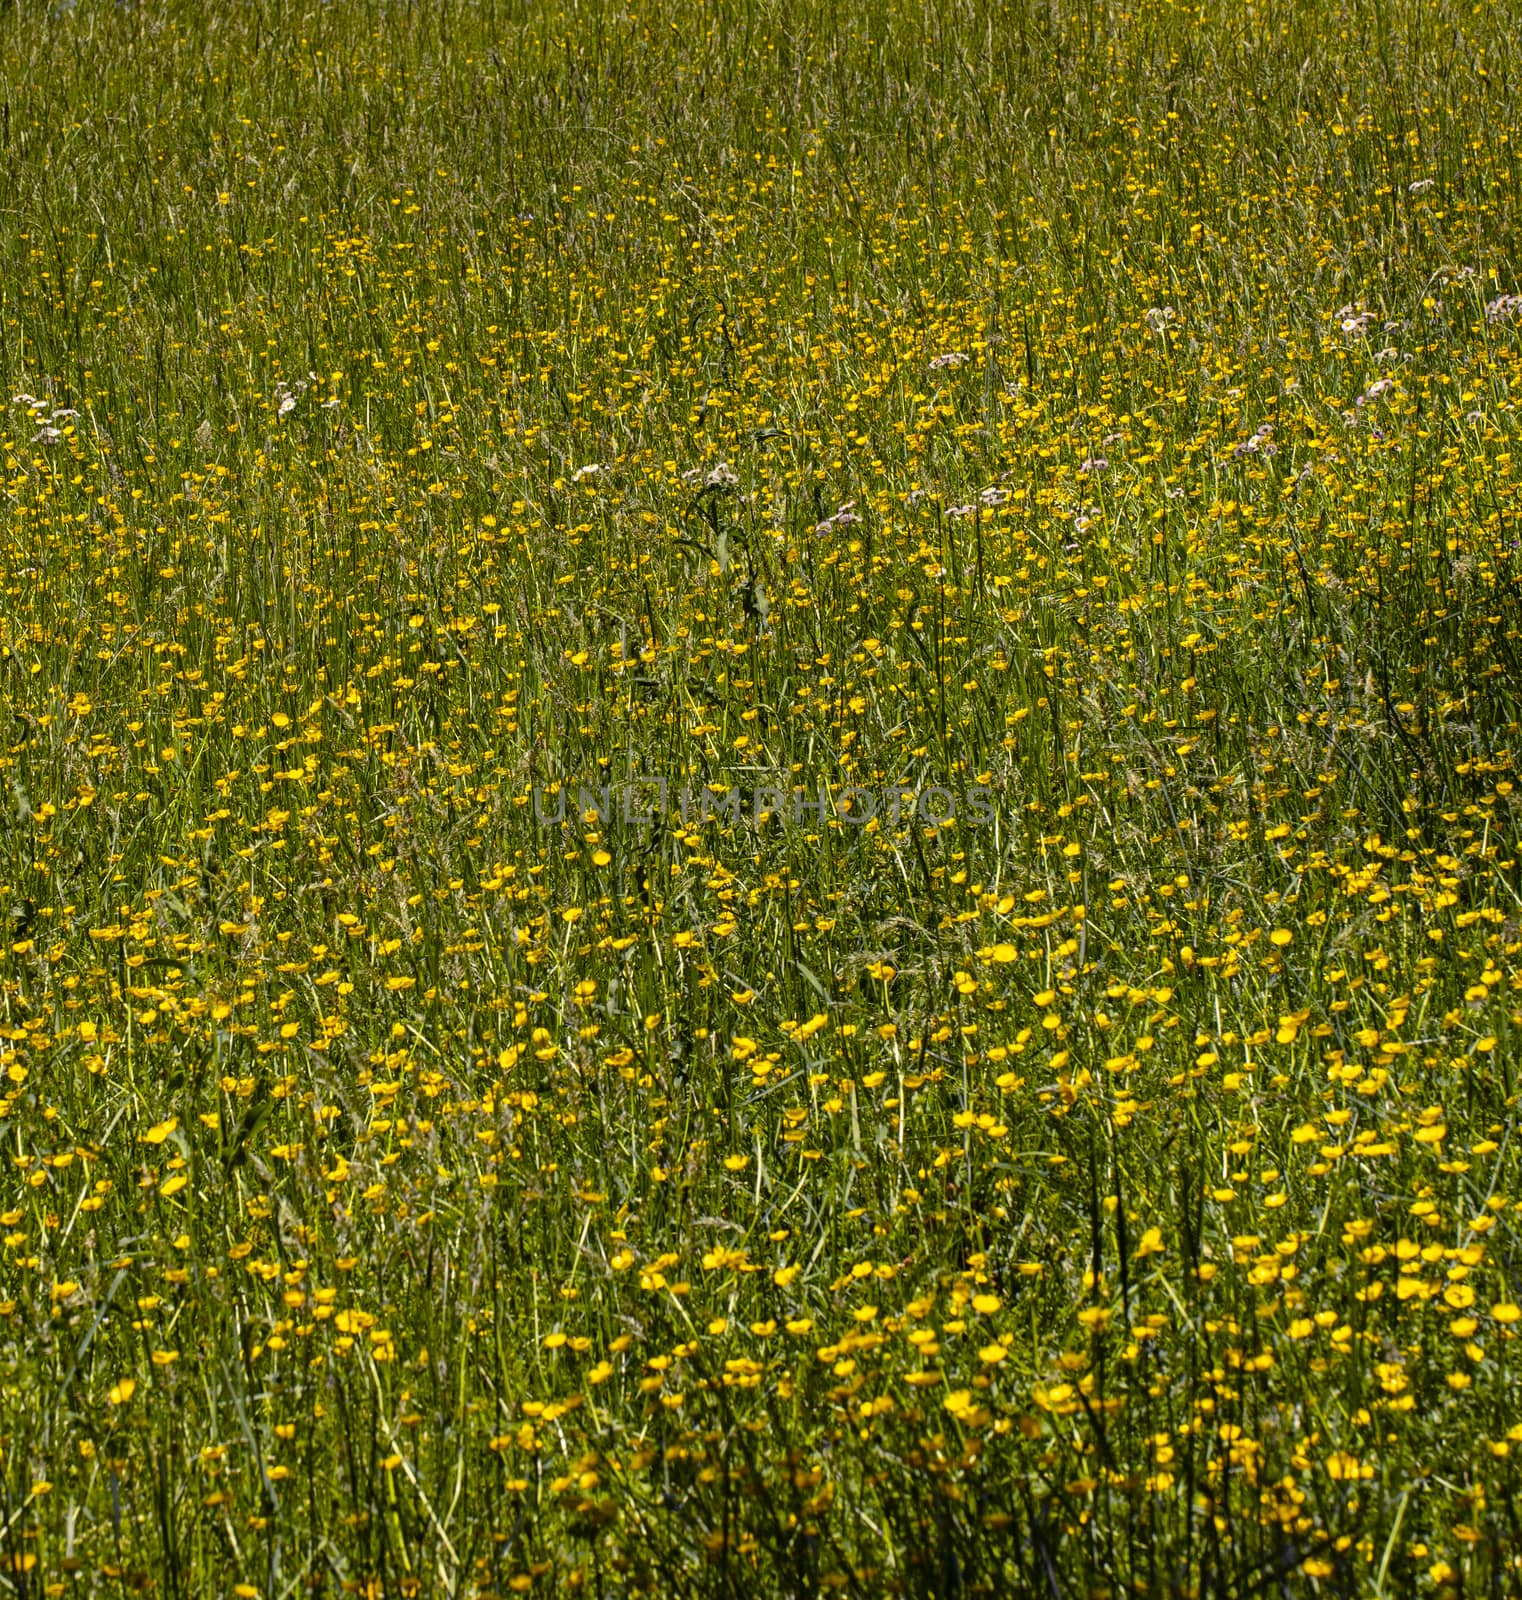 Horse pasture deep in grass and buttercups.